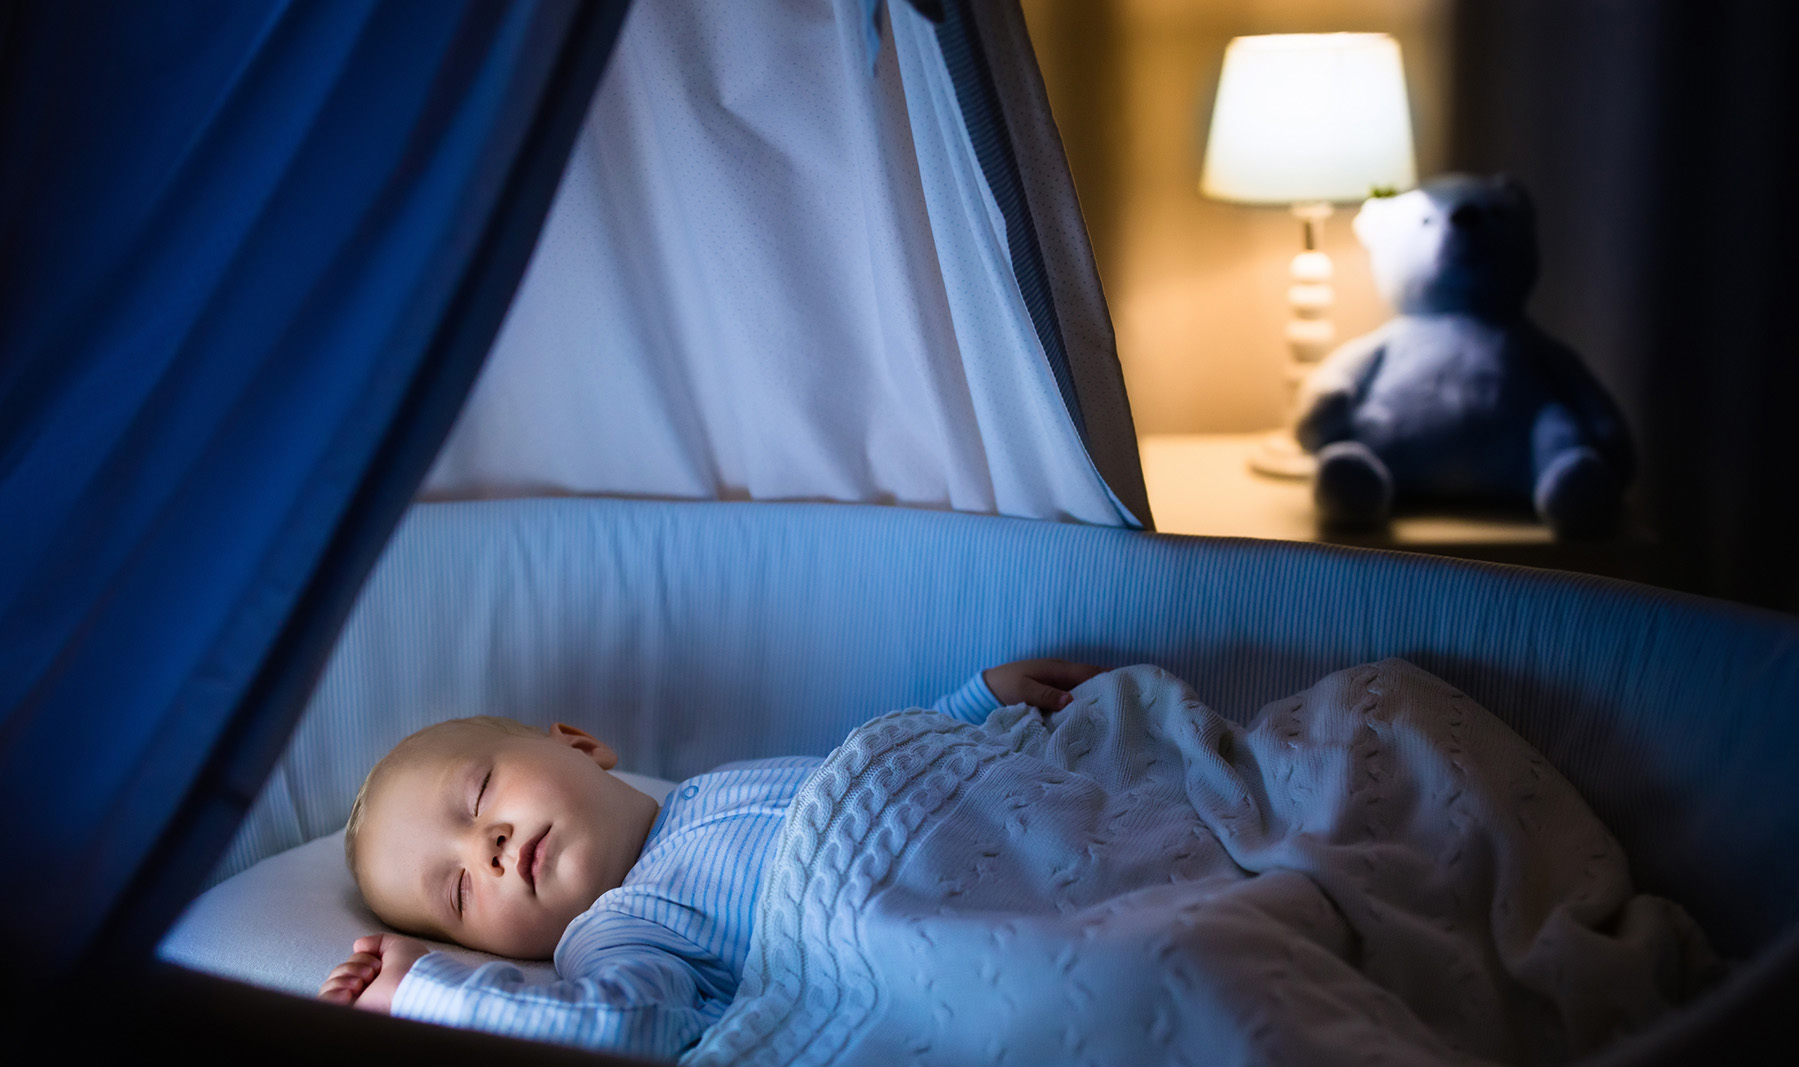 Many sleep coaches suggest a range of interventions including addressing the bedroom setting as well as the infant's nutrition and nap schedule. (Photo: iStock)